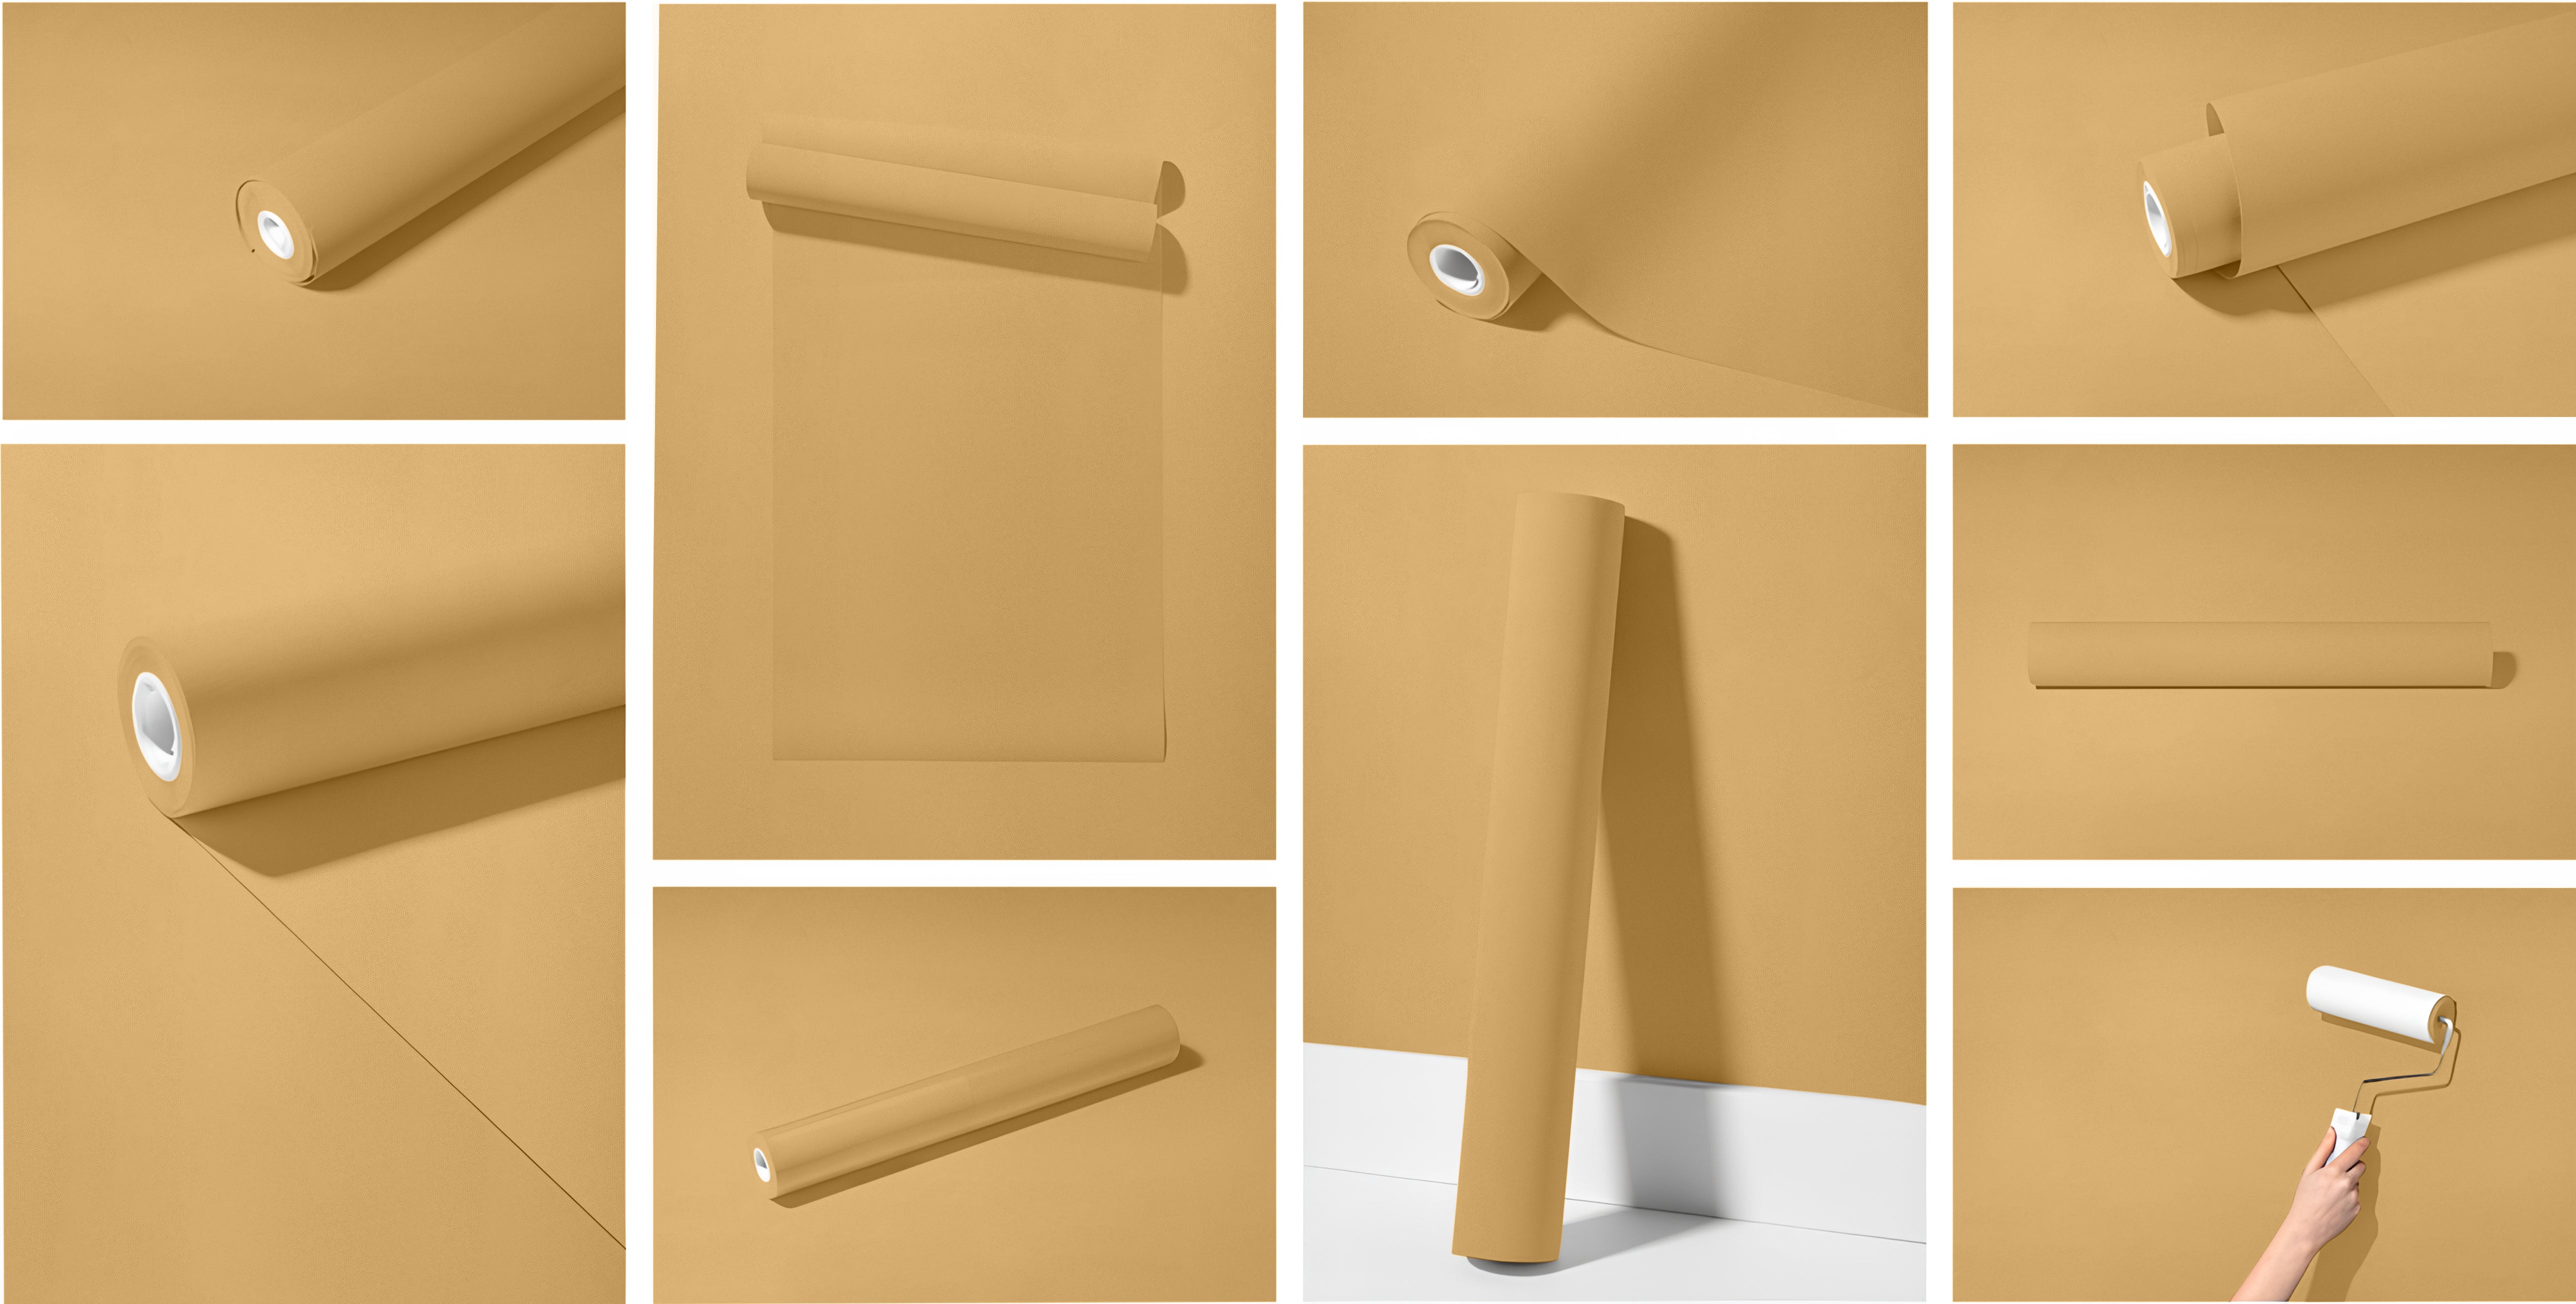 Peel & Stick Removable Re-usable Paint - Color RAL 1002 Sand Yellow - offRAL™ - RALRAW LLC, USA